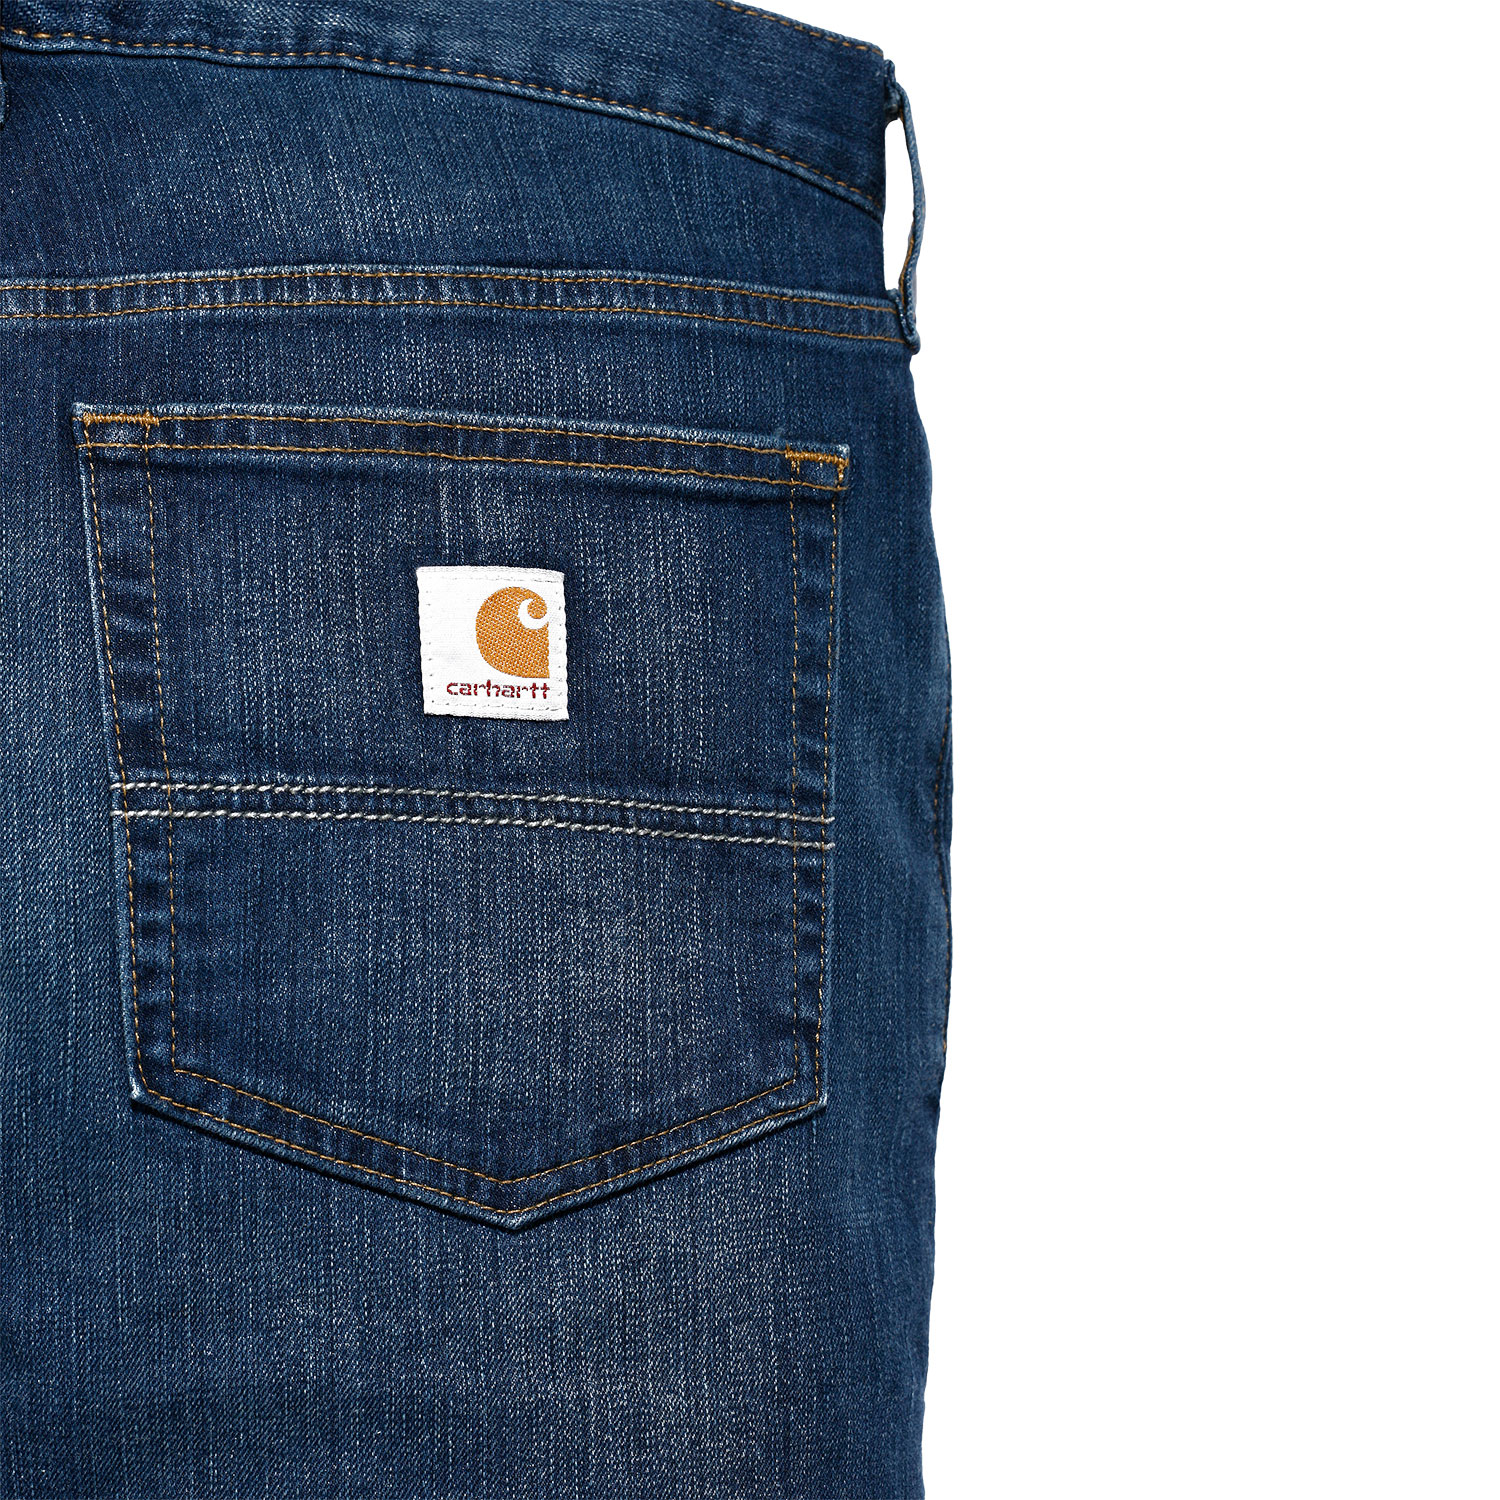 Carhartt Jeans Rugged Flex Relaxed Fit - 3